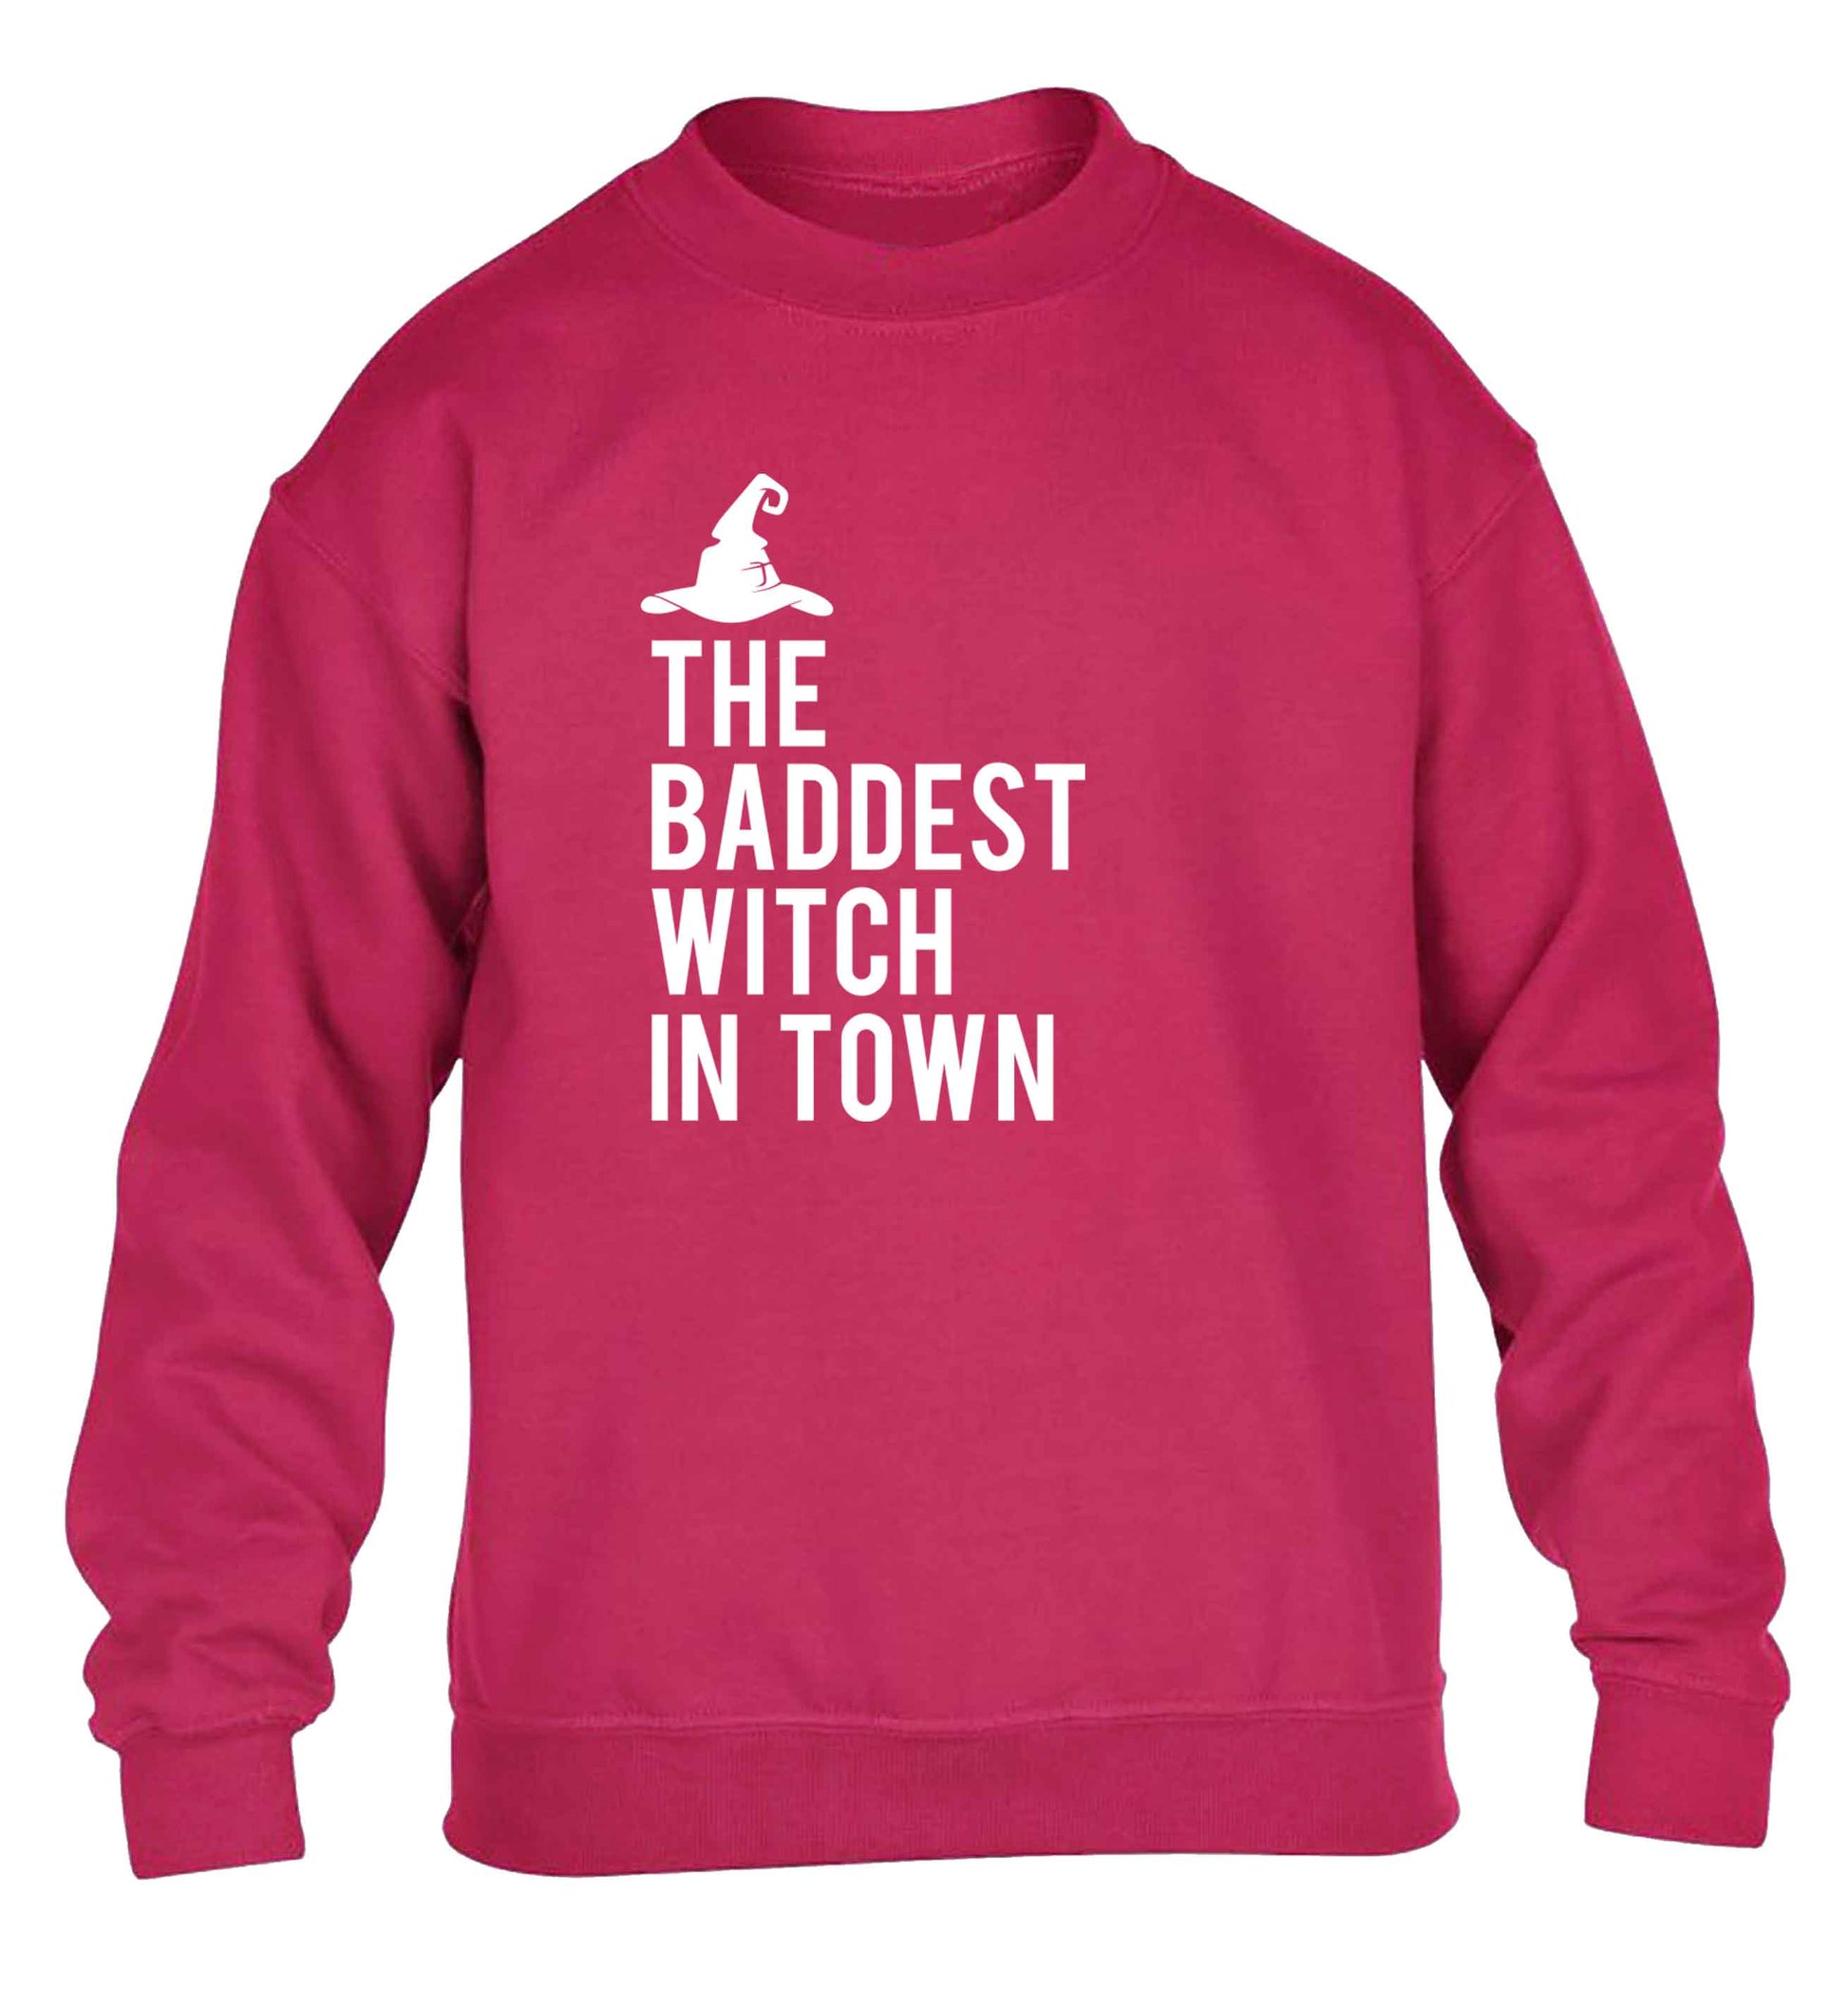 Badest witch in town children's pink sweater 12-13 Years